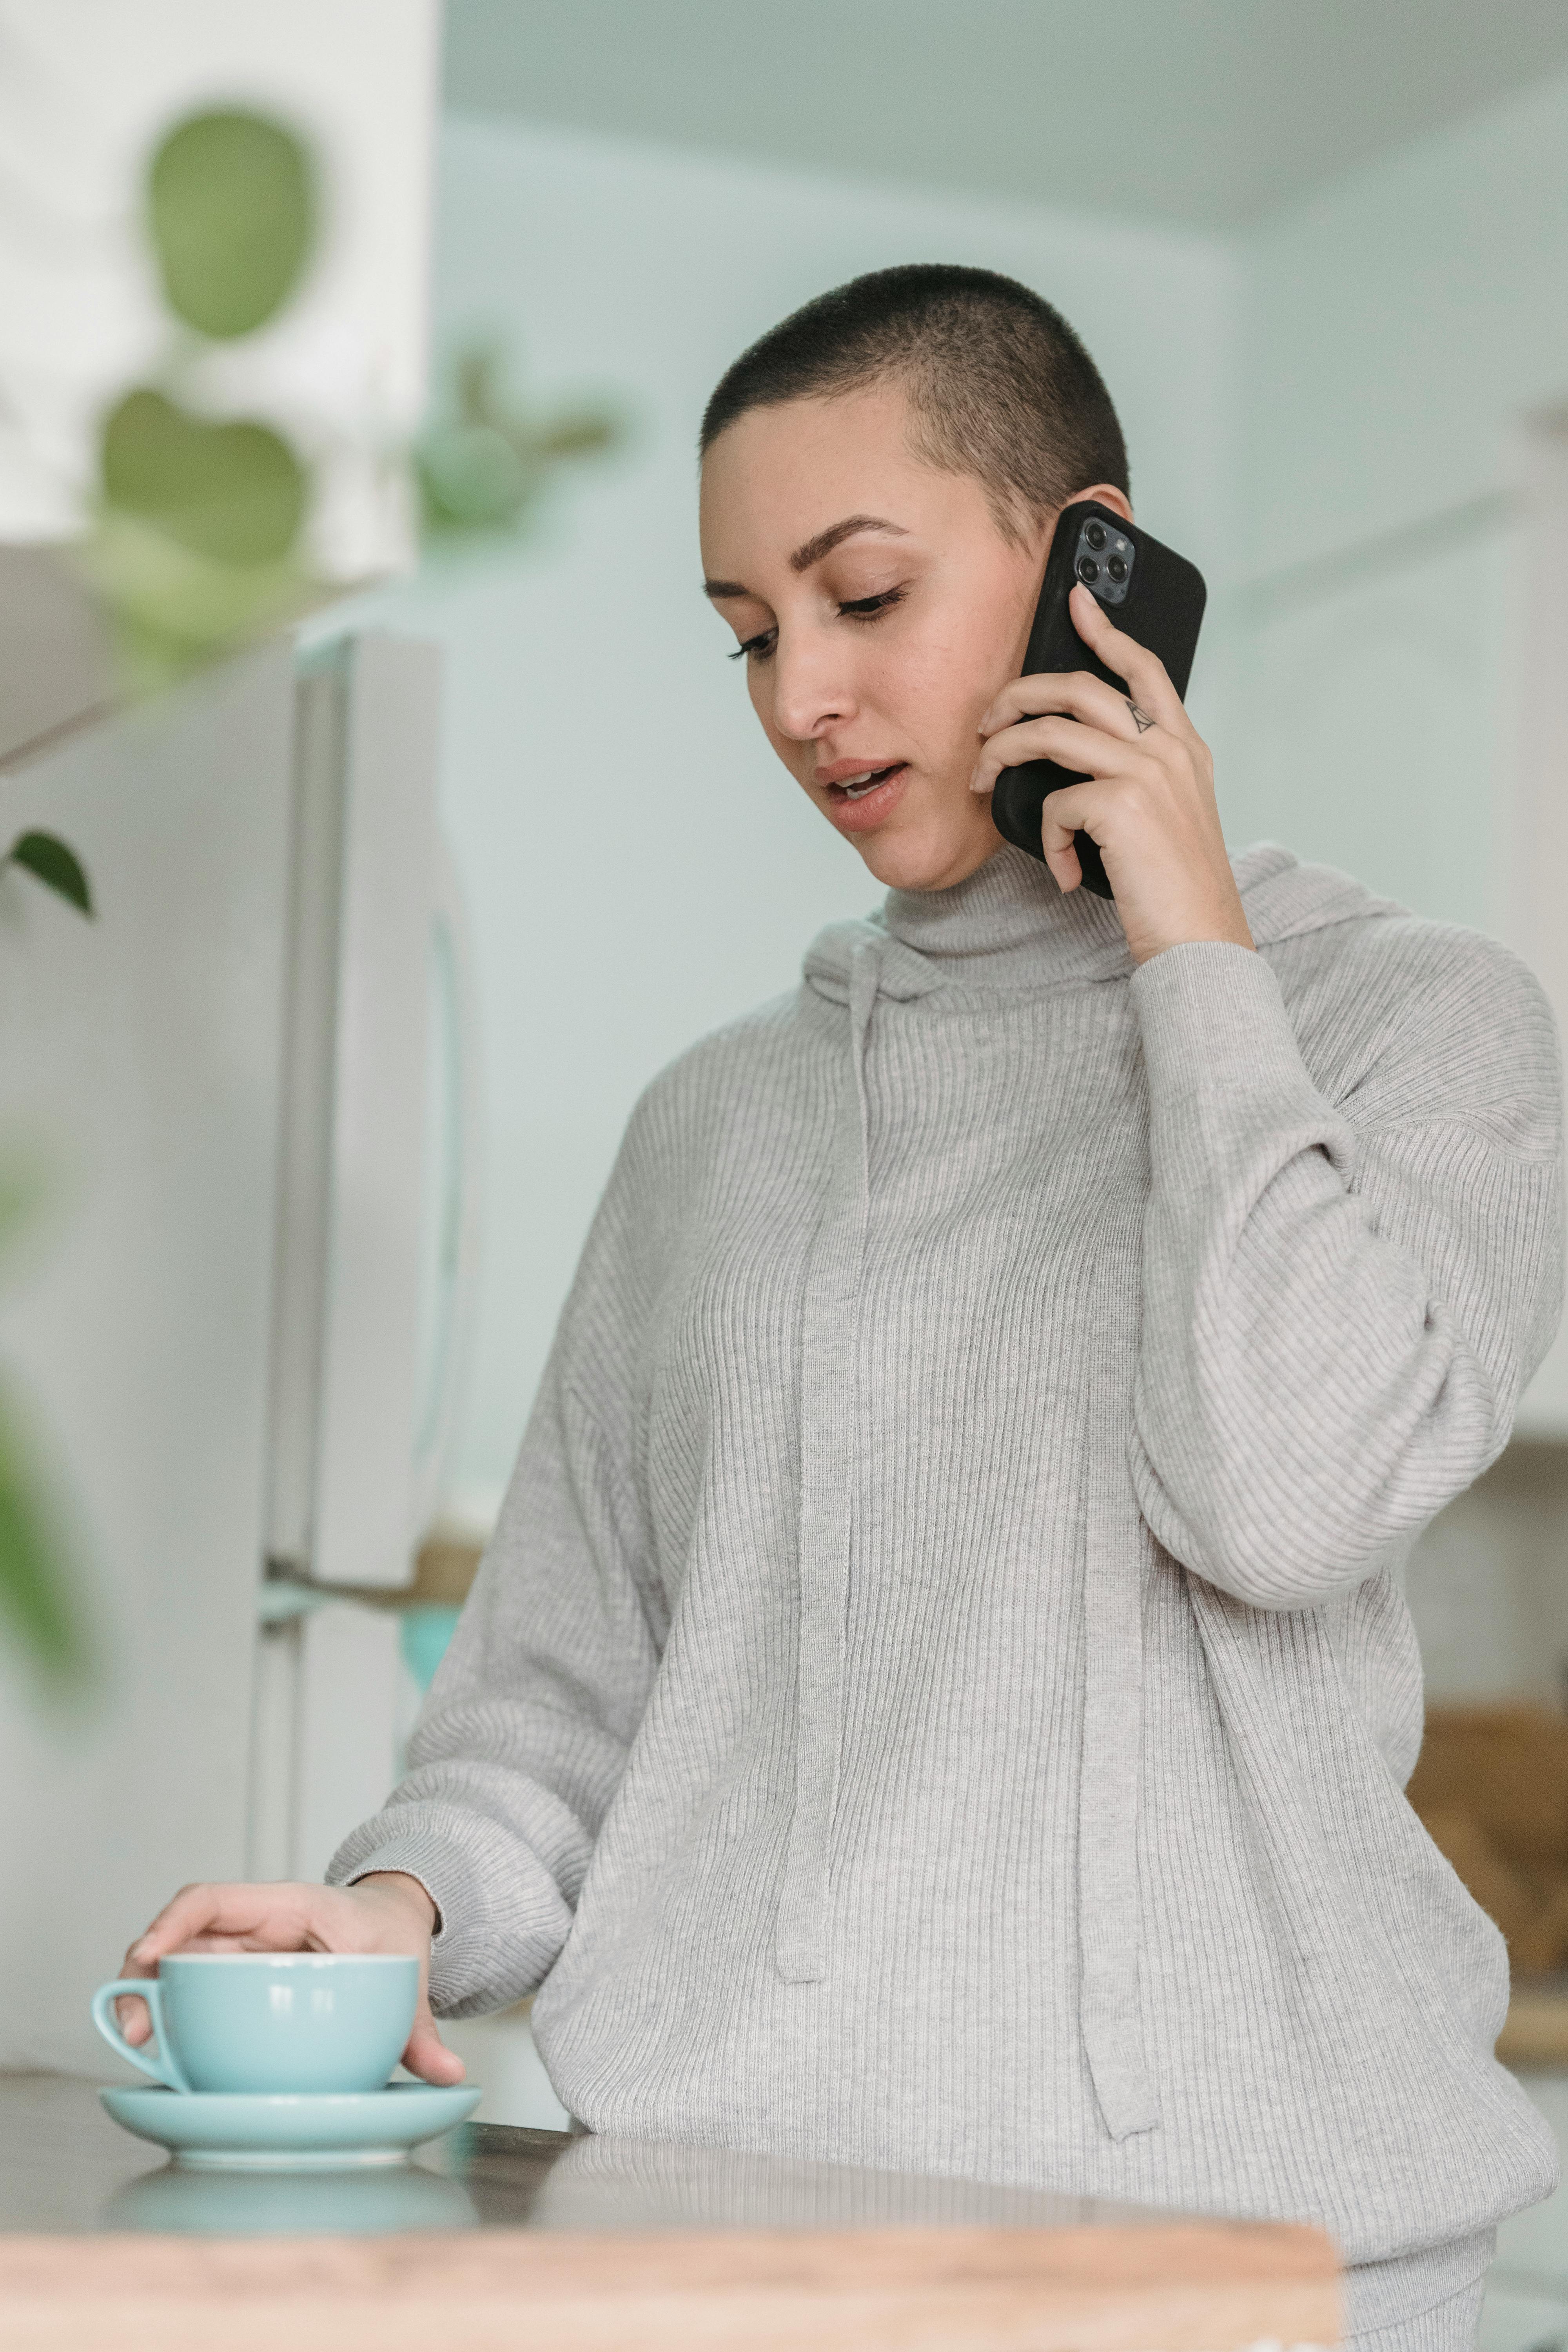 A woman in conversation on a cell phone | Source: Pexels